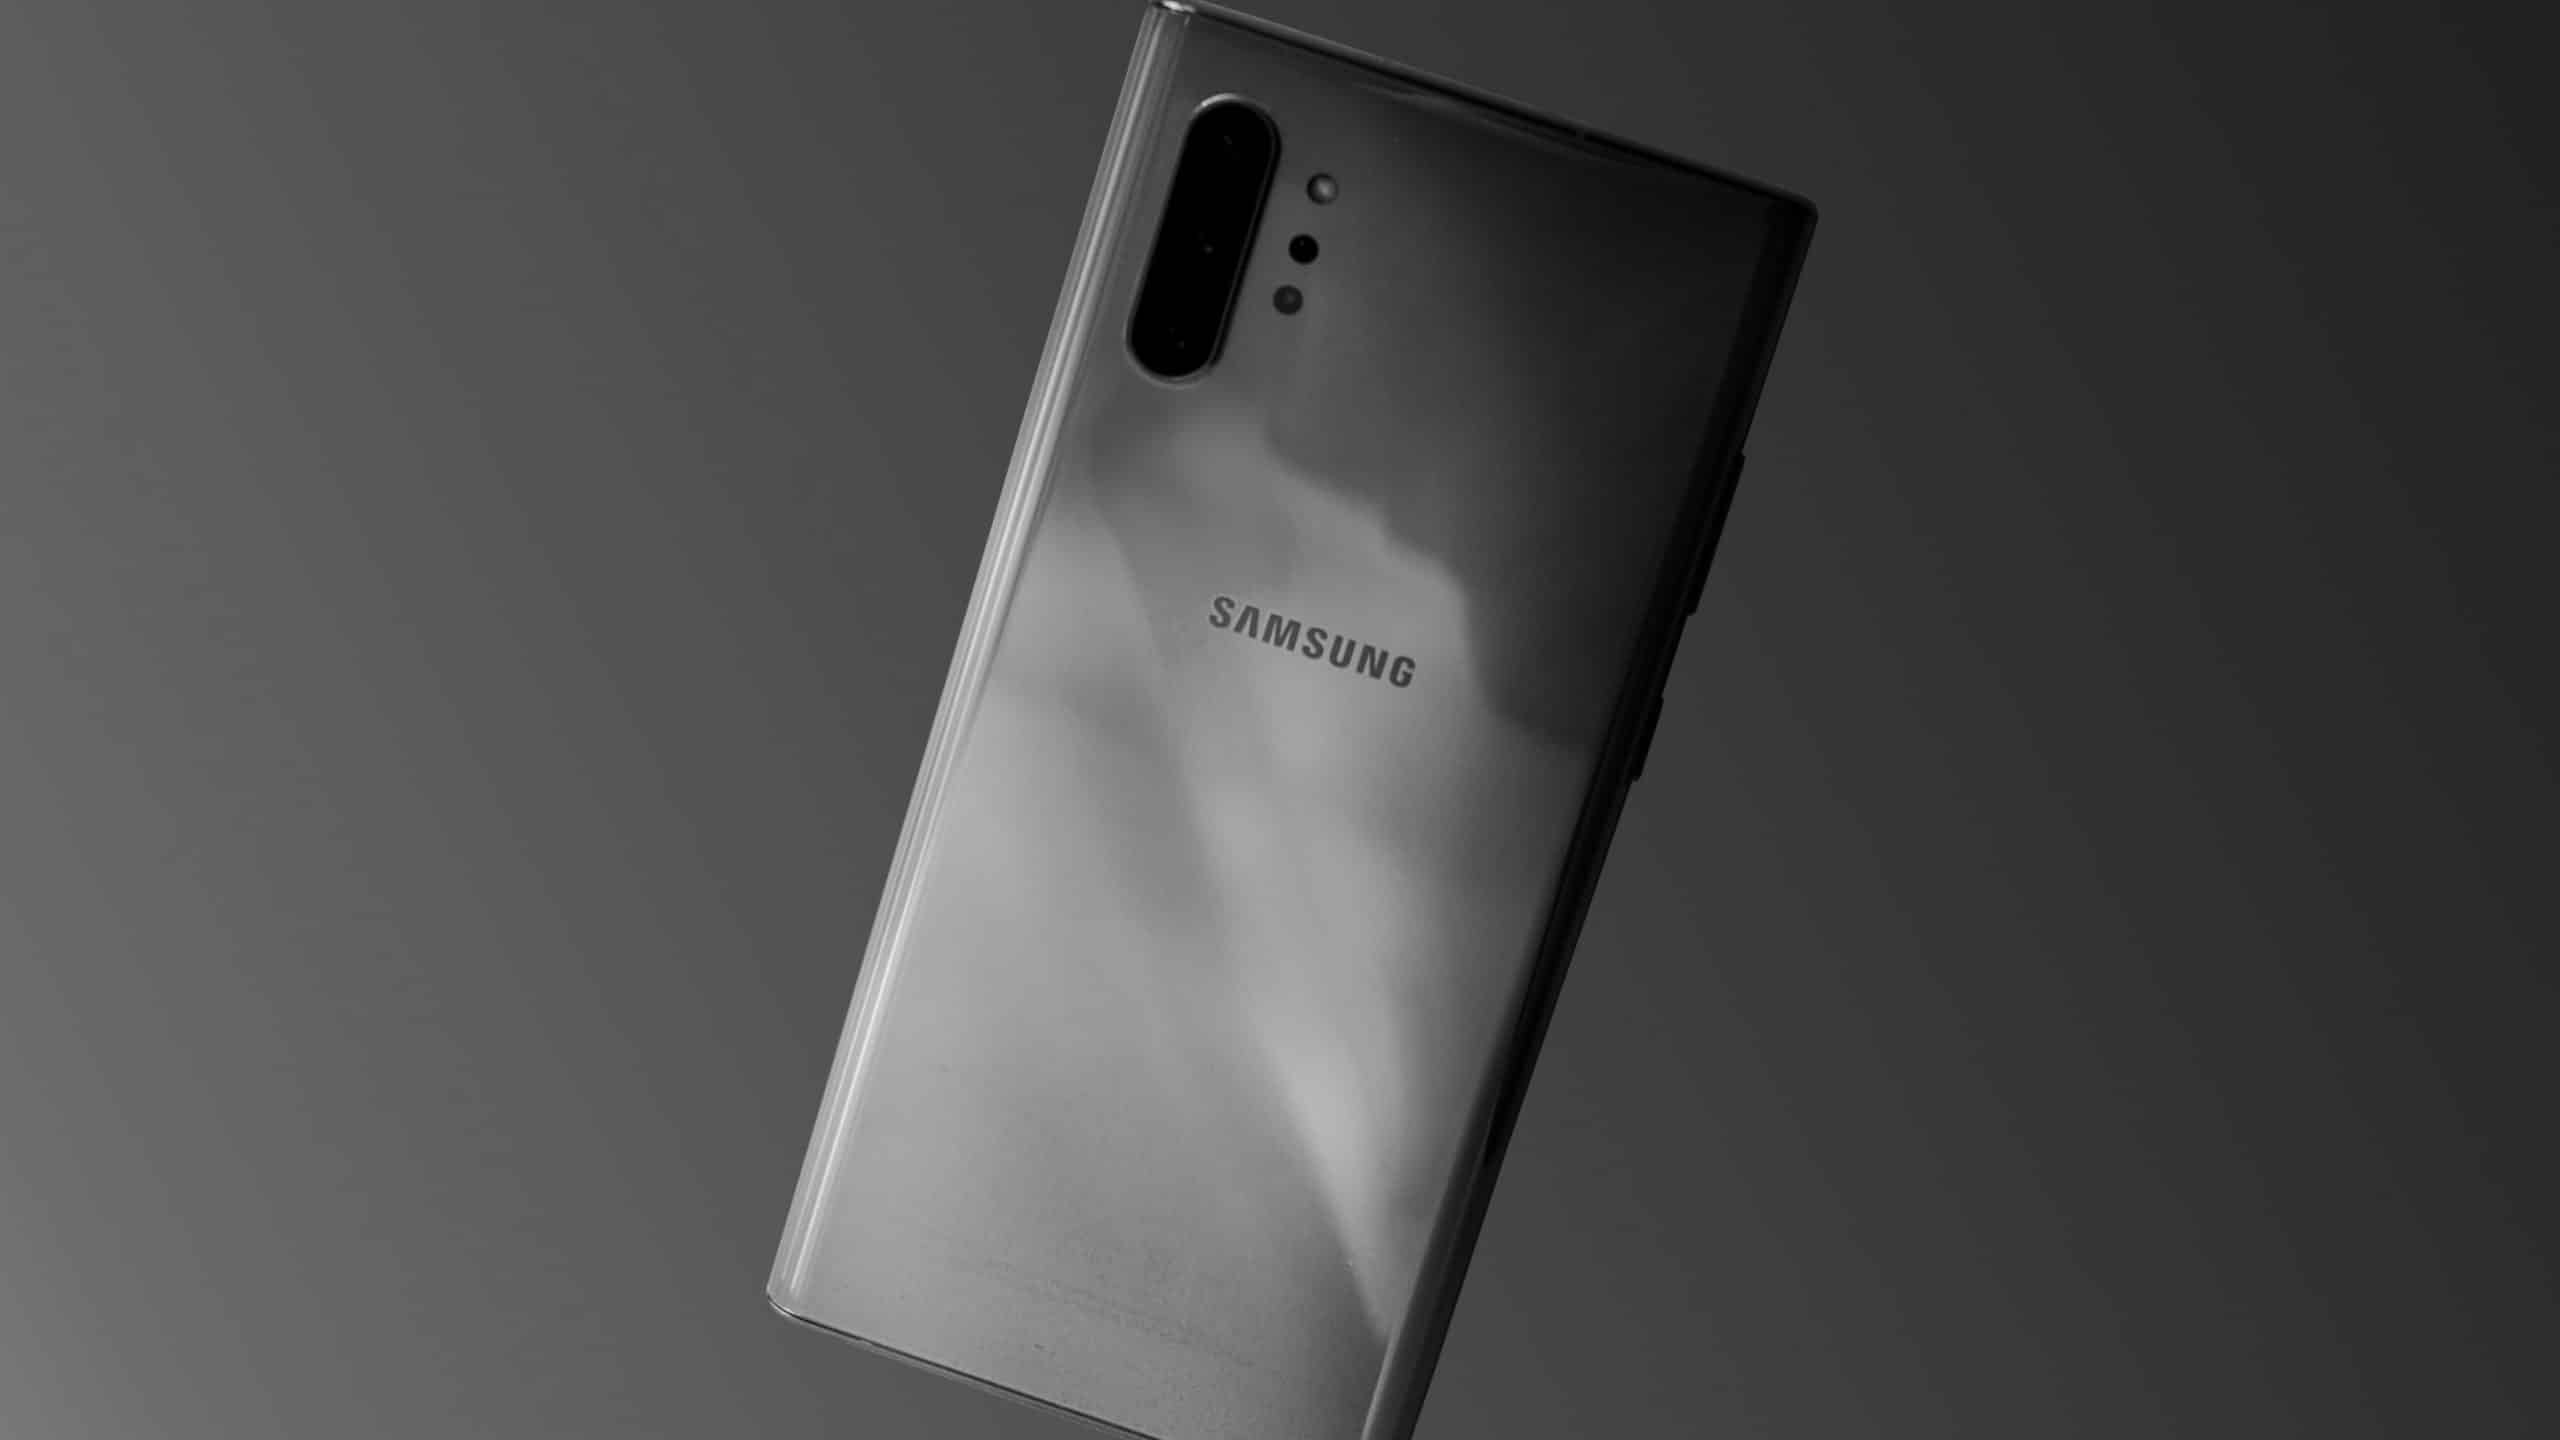 Back view of the Samsung Galaxy Note 10